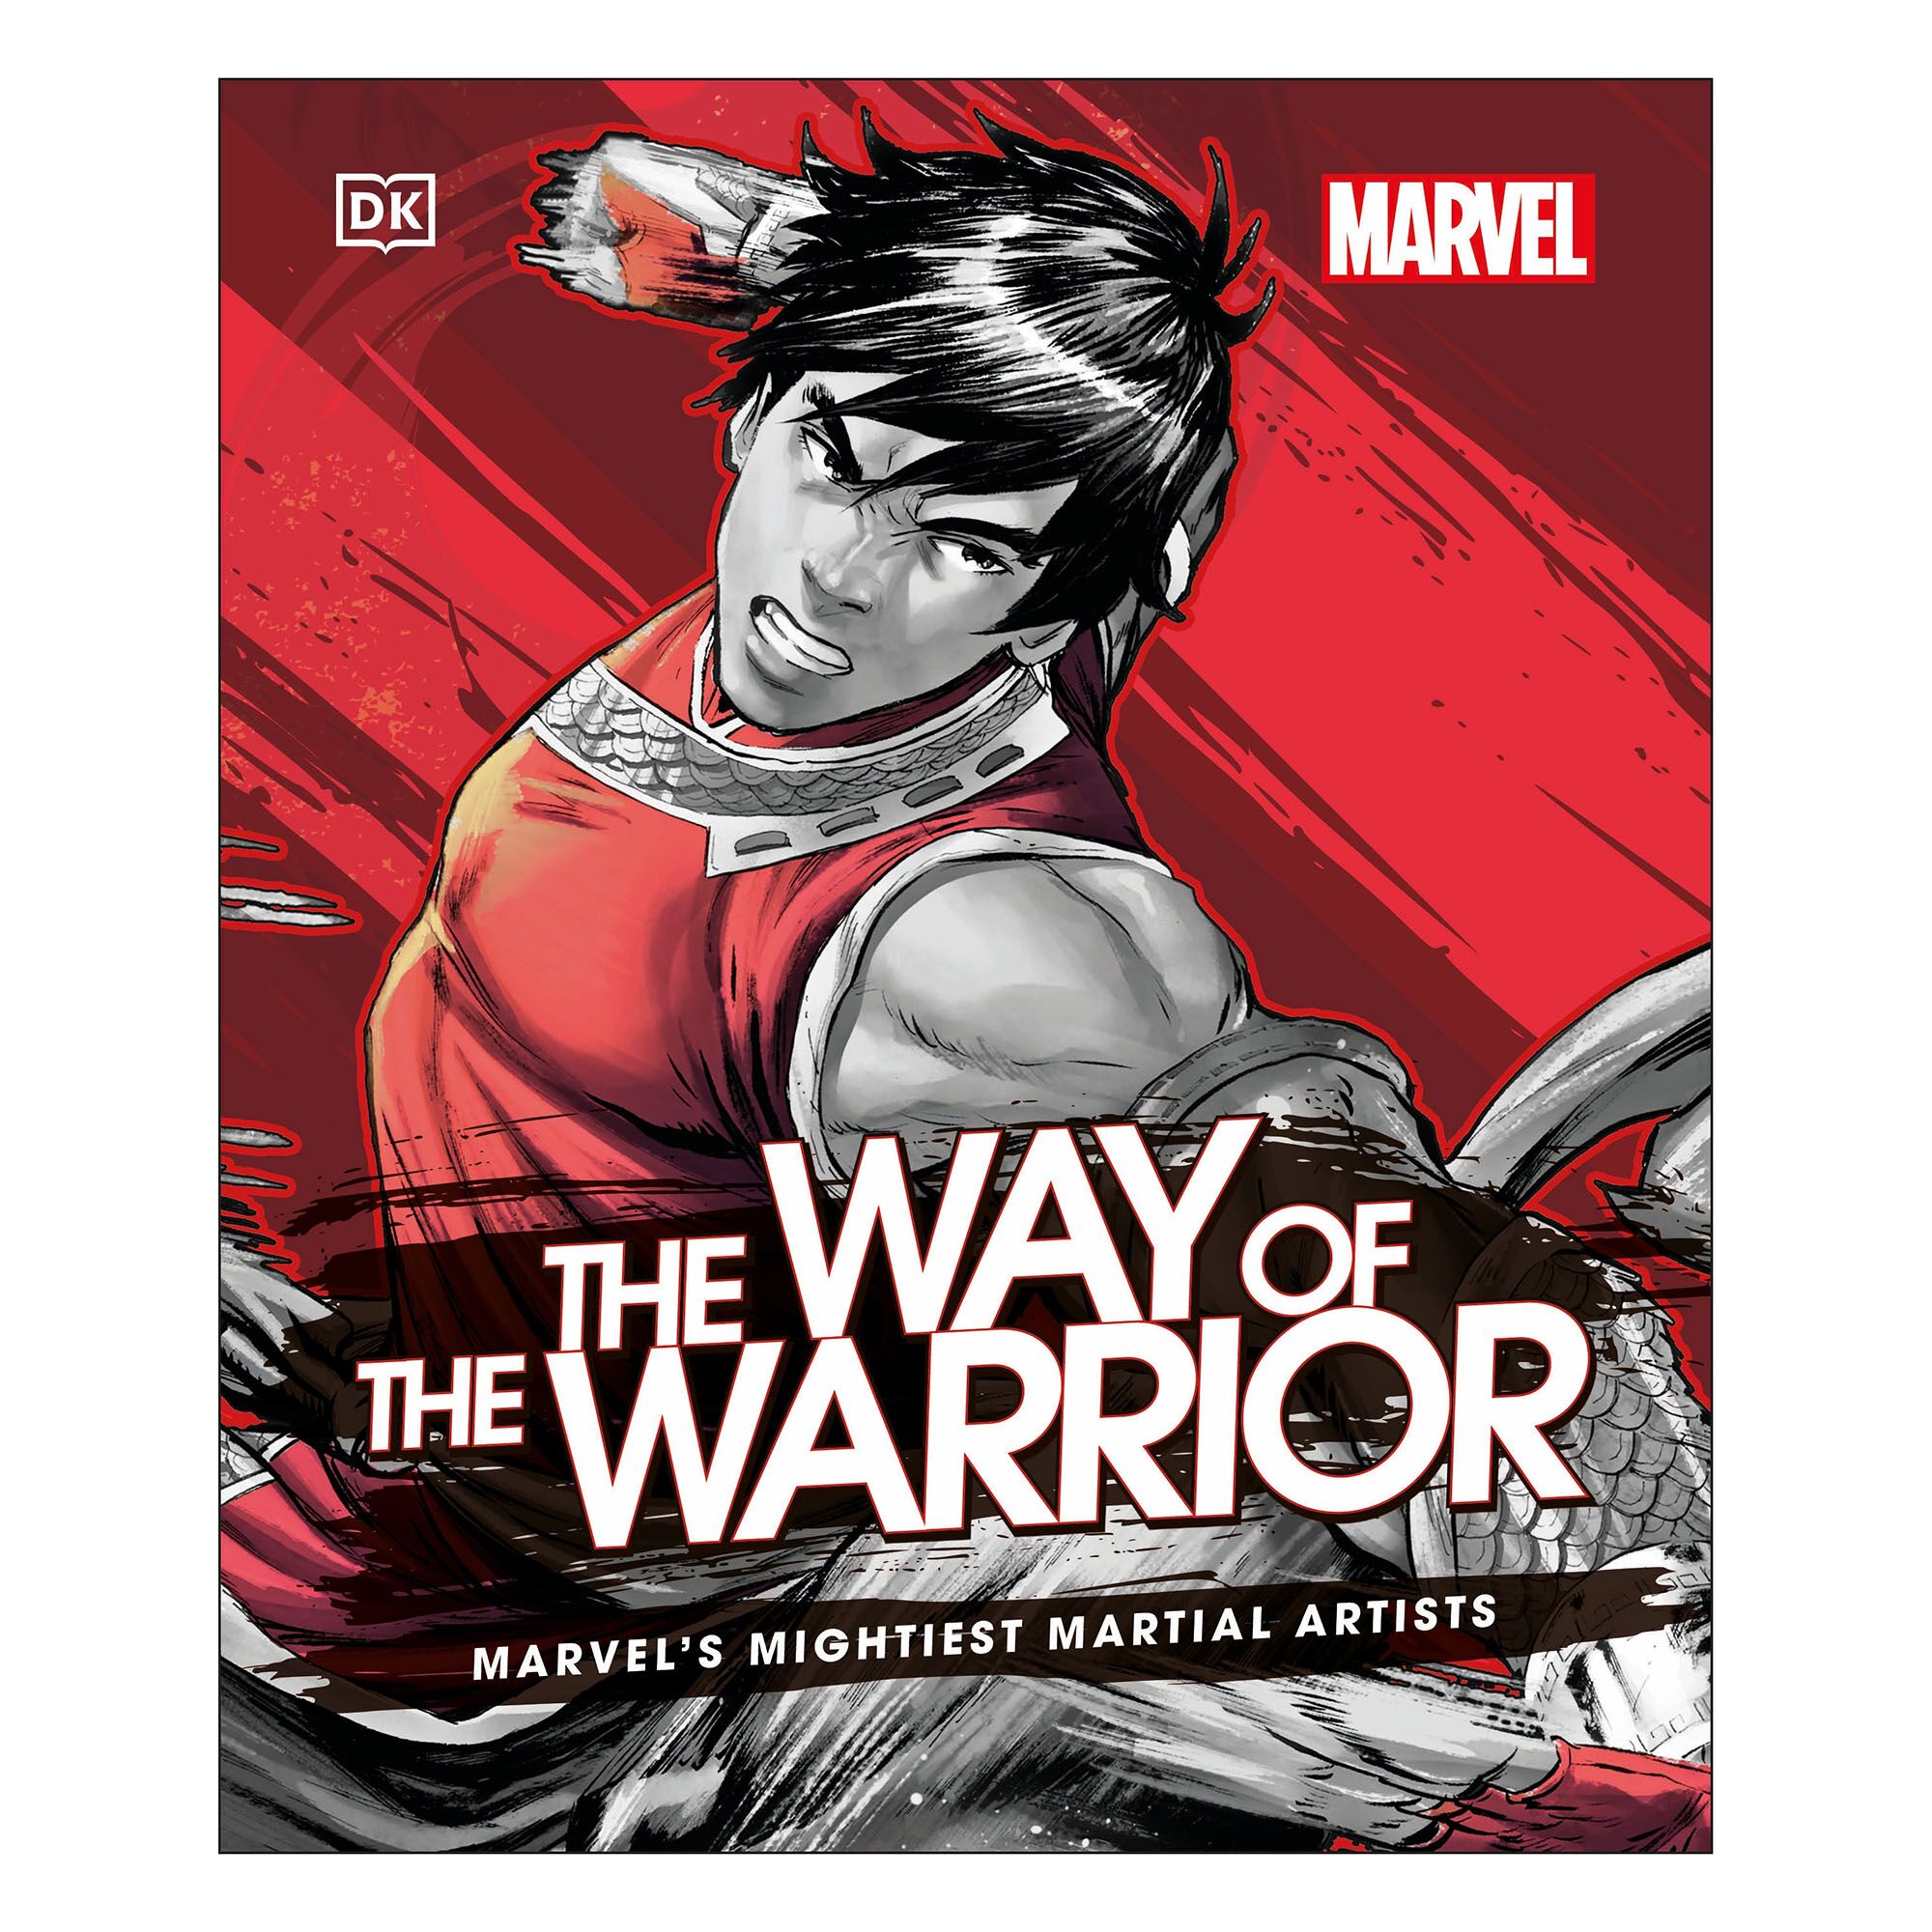 'Marvel The Way of the Warrior' cover